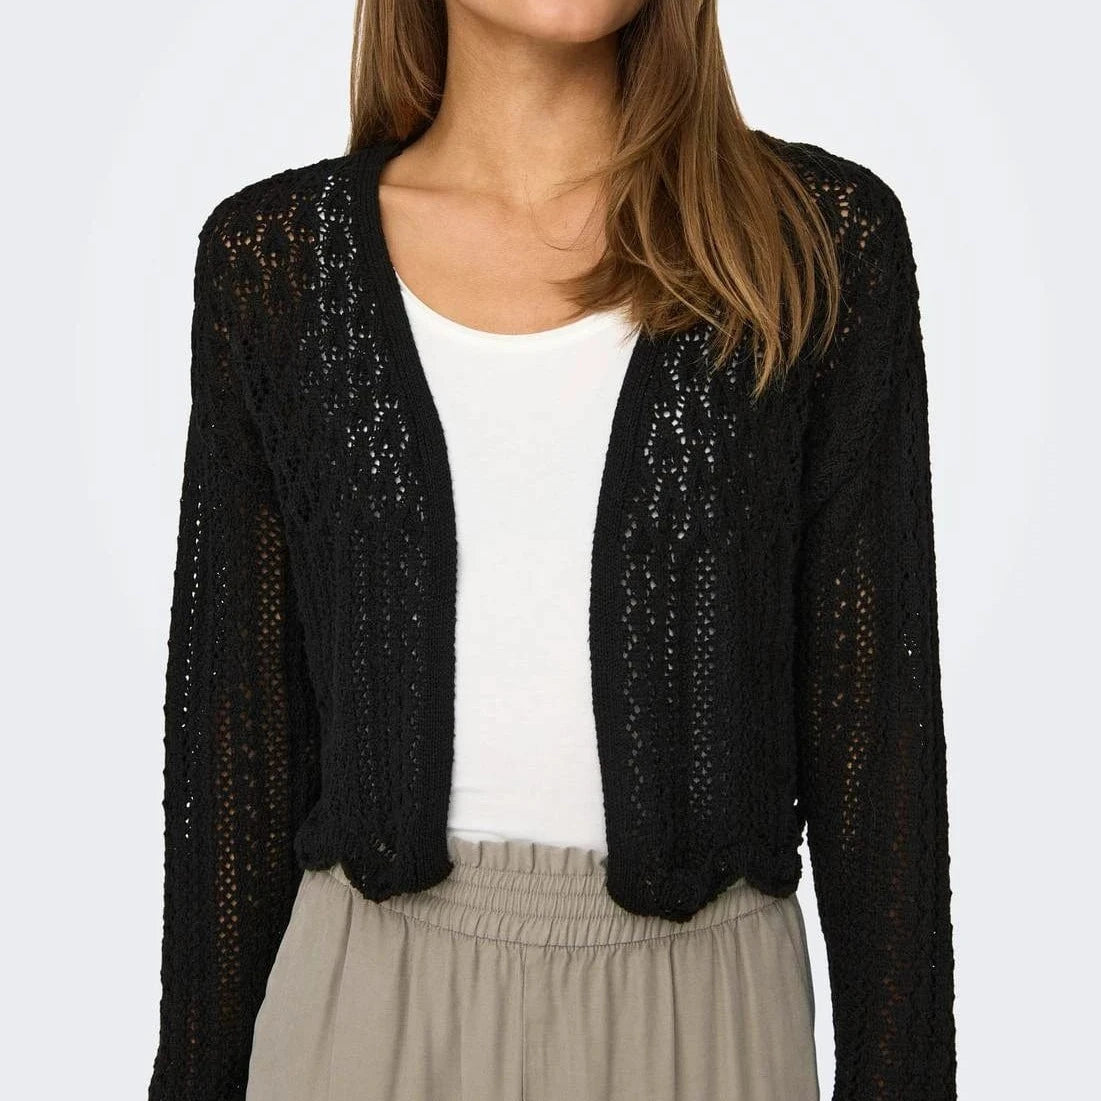 ONLY Cropped Knit Cardigan in Black